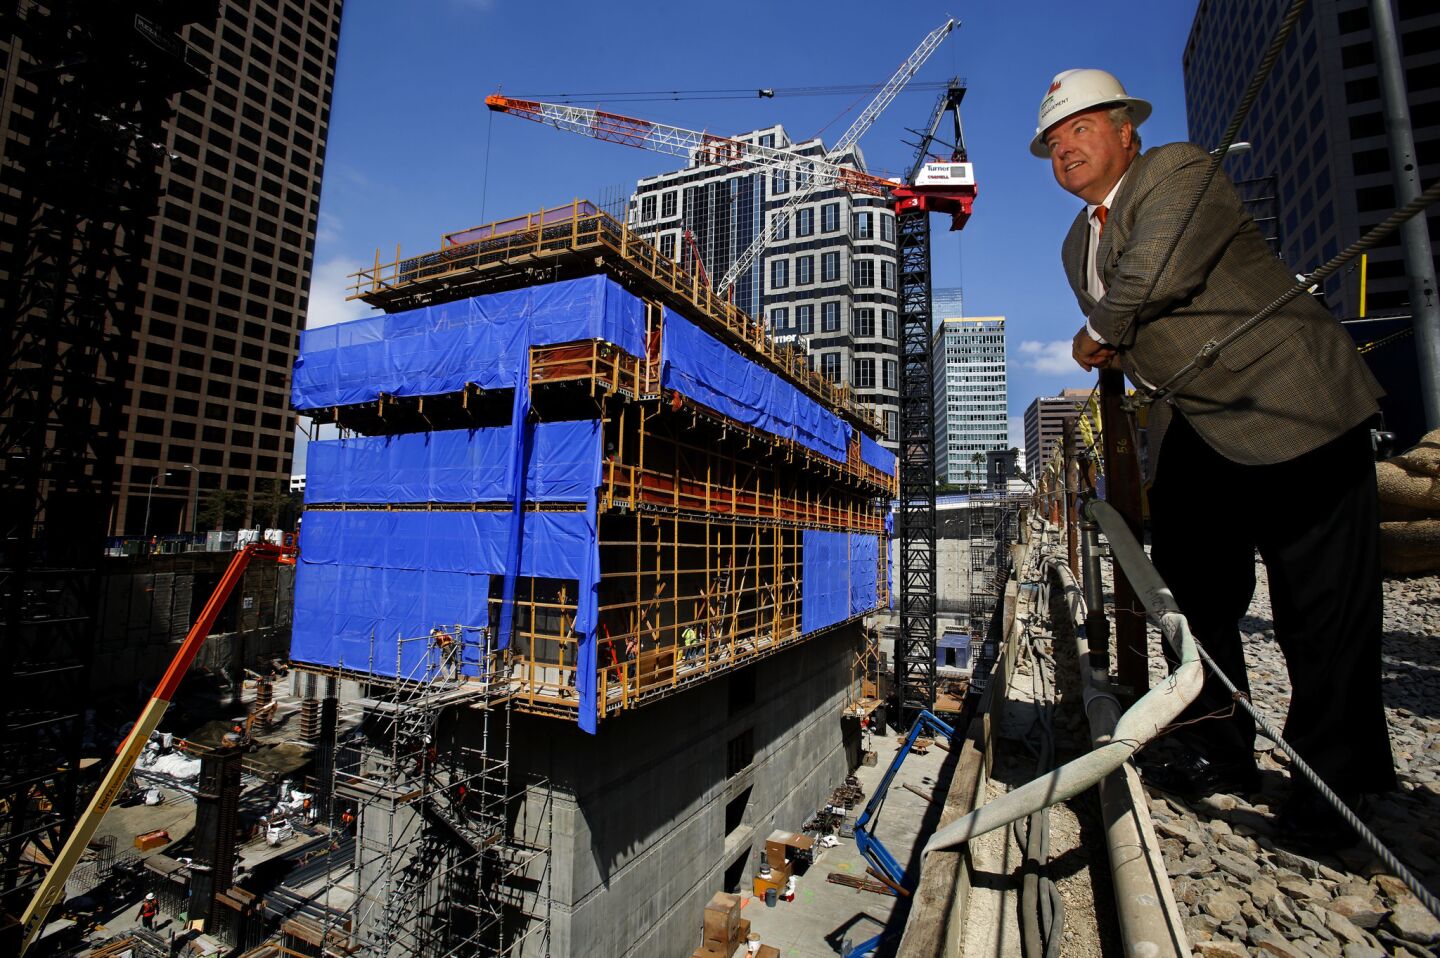 Chris Martin, chairman and CEO of Martin Project Management, at the Wilshire Grand tower site in downtown Los Angeles. Martin's firm is overseeing the construction.